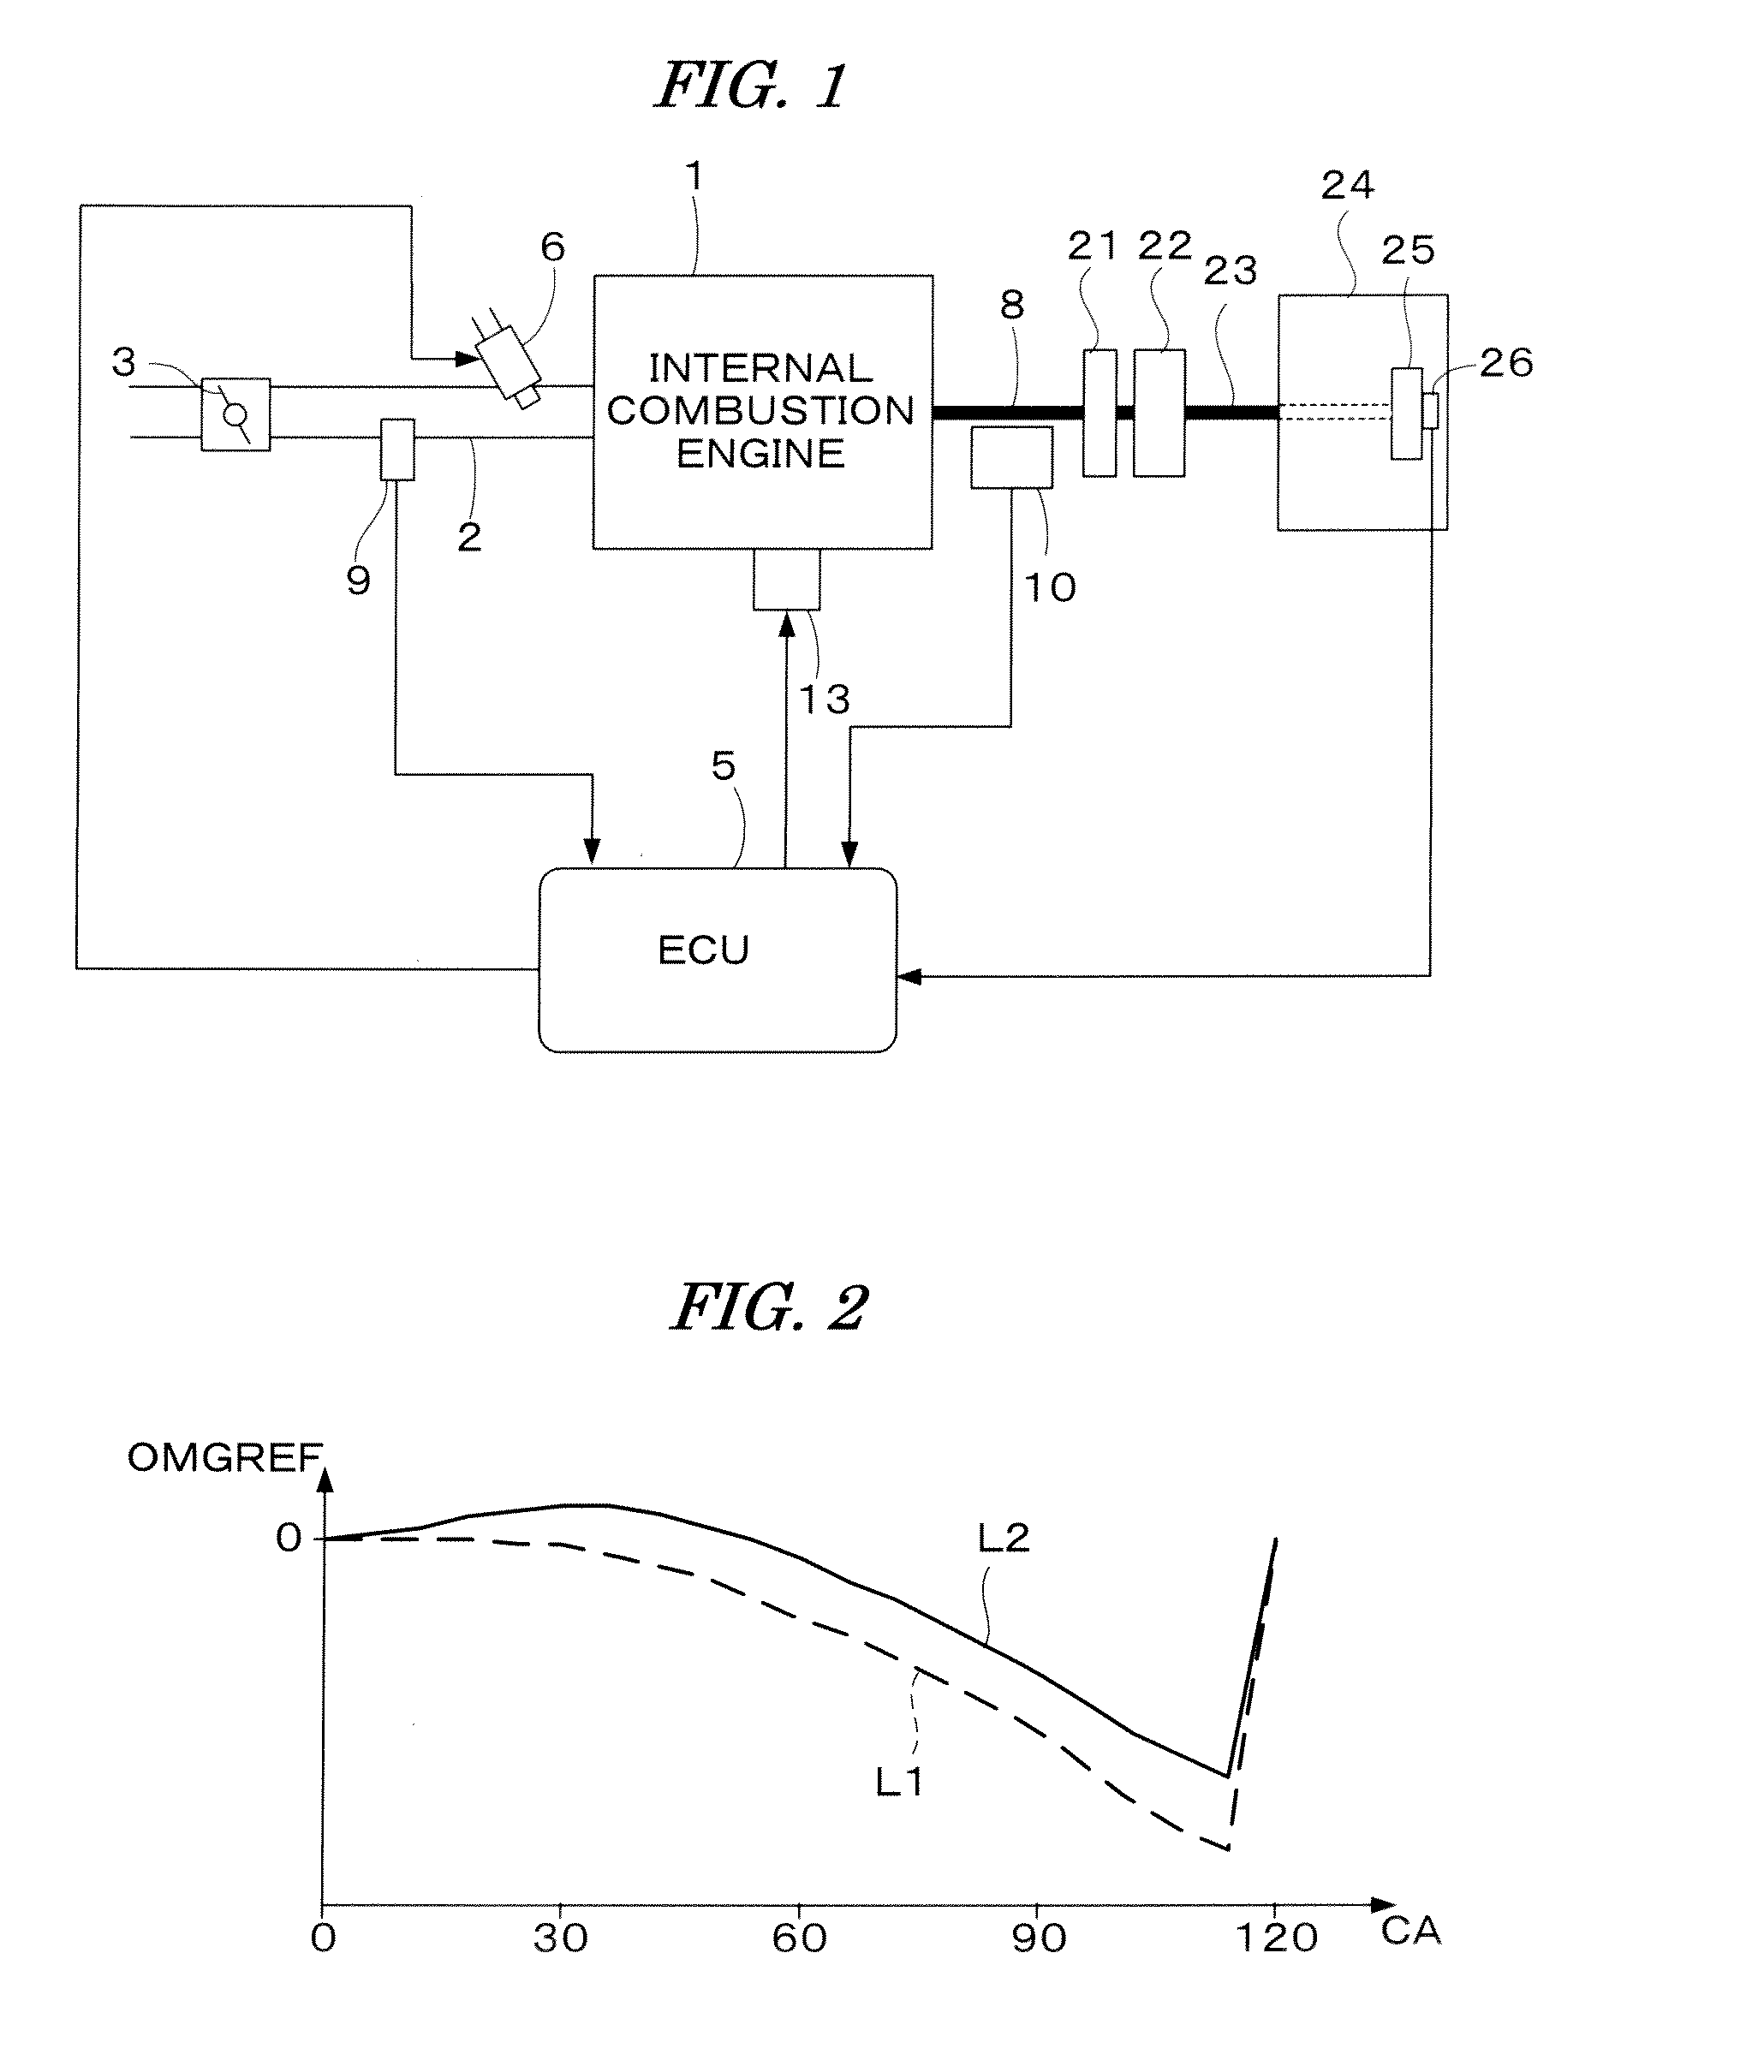 Misfire detecting apparatus for internal combustion engine